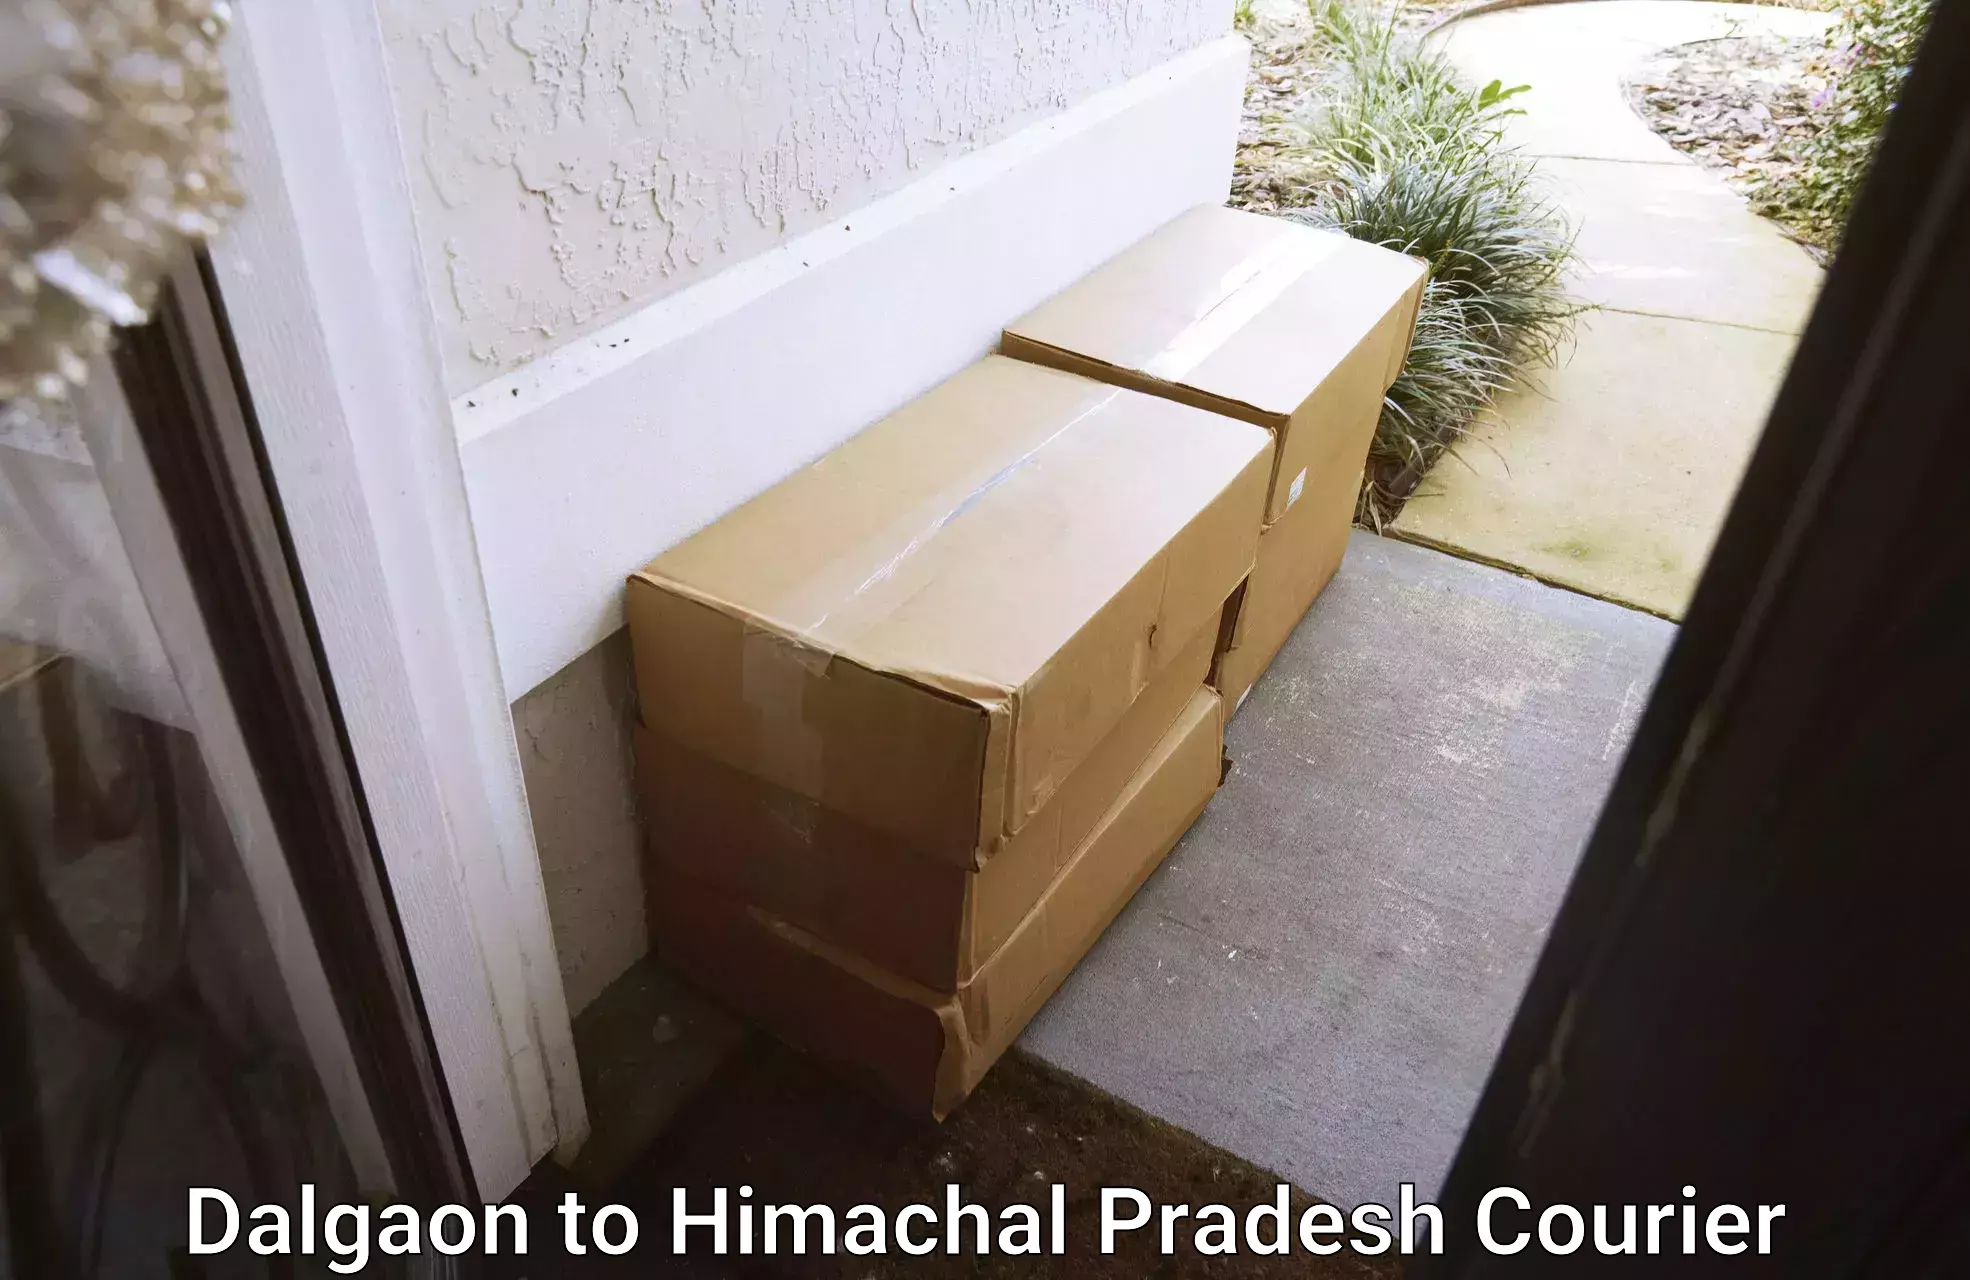 Easy access courier services Dalgaon to Himachal Pradesh